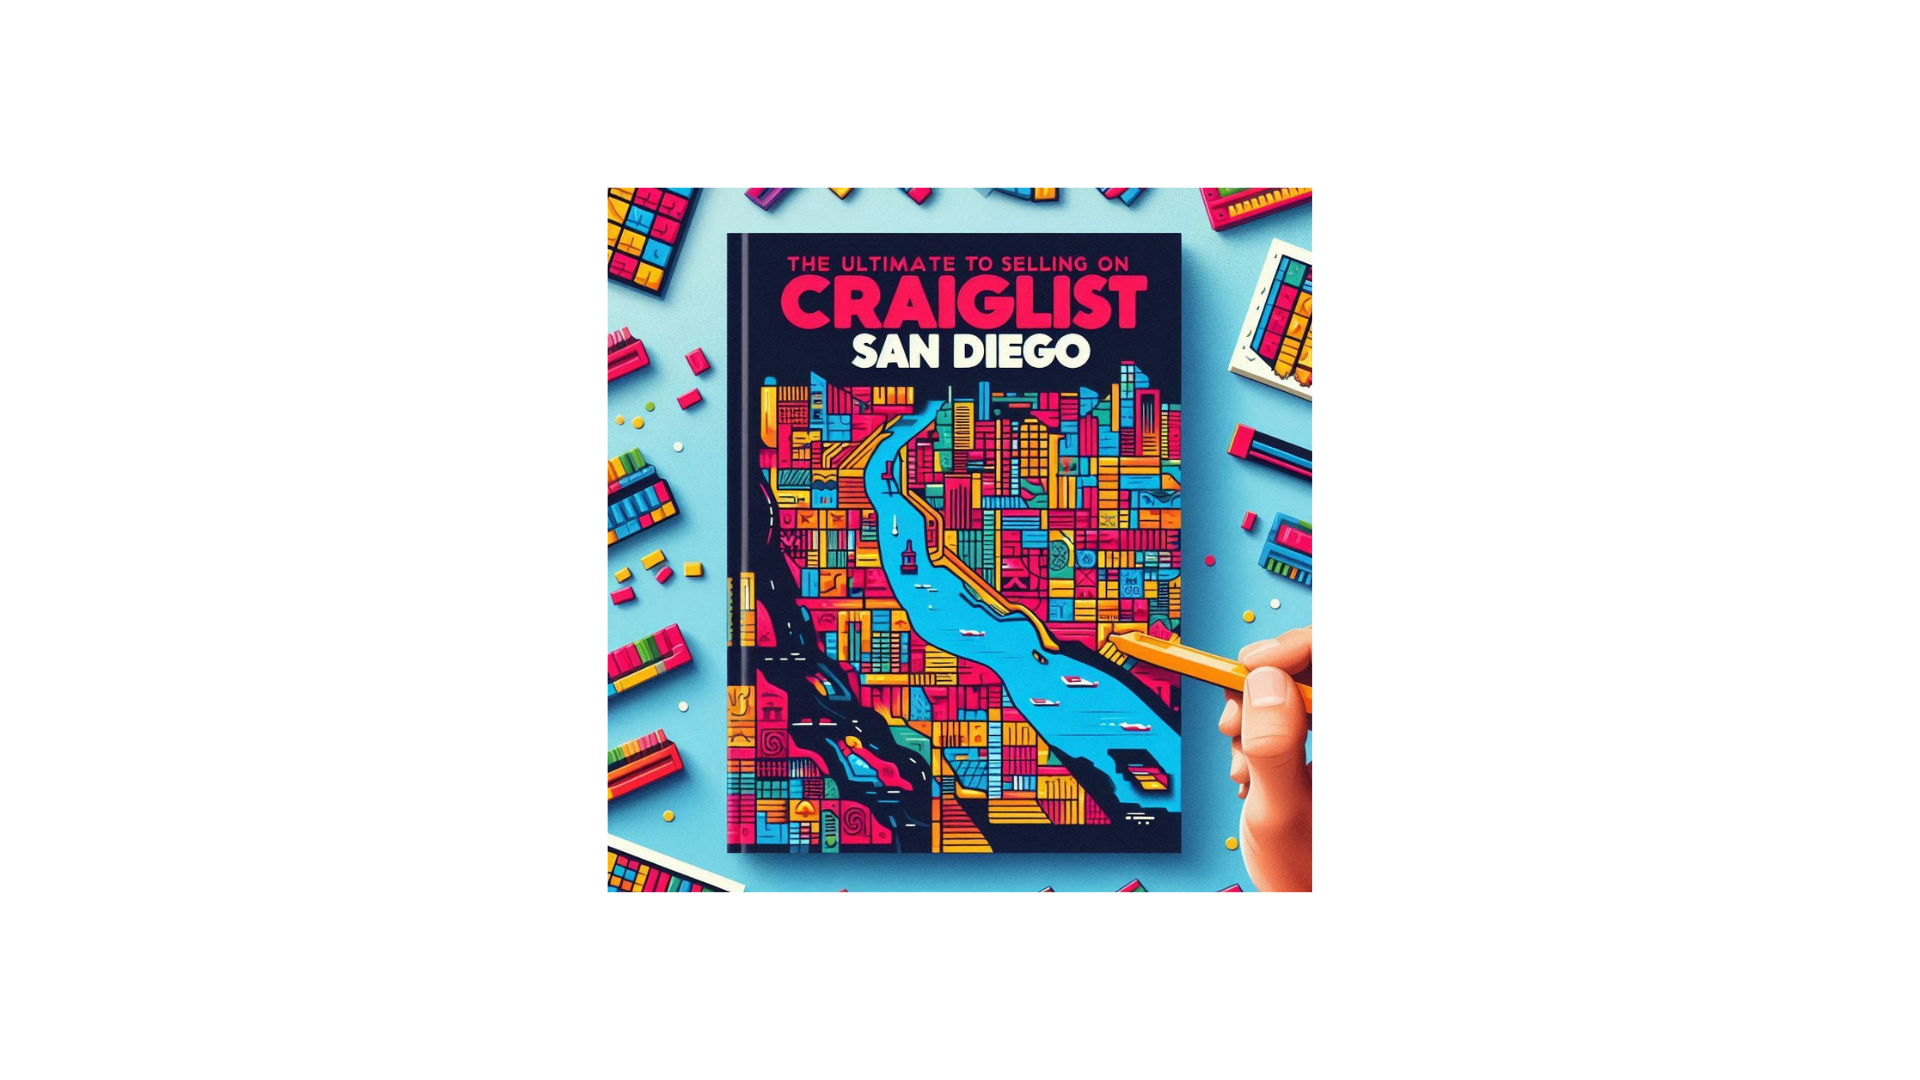 The Ultimate Guide to Selling on Craigslist San Diego